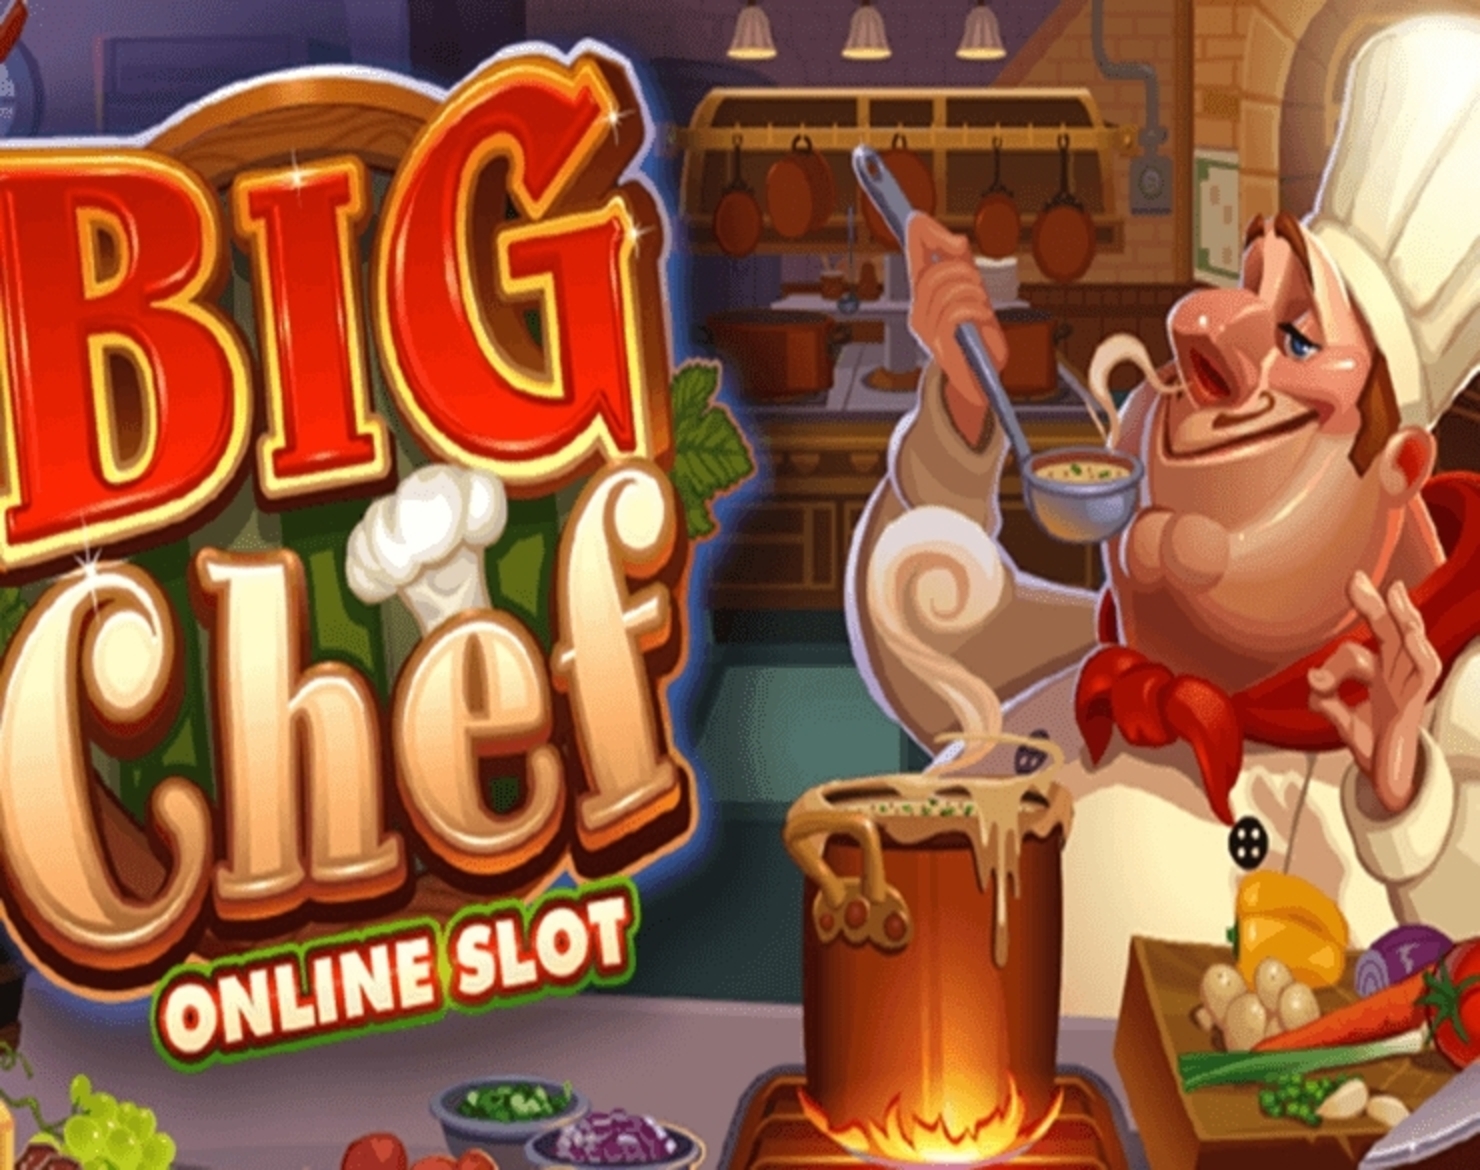 The Big Chef Online Slot Demo Game by Microgaming